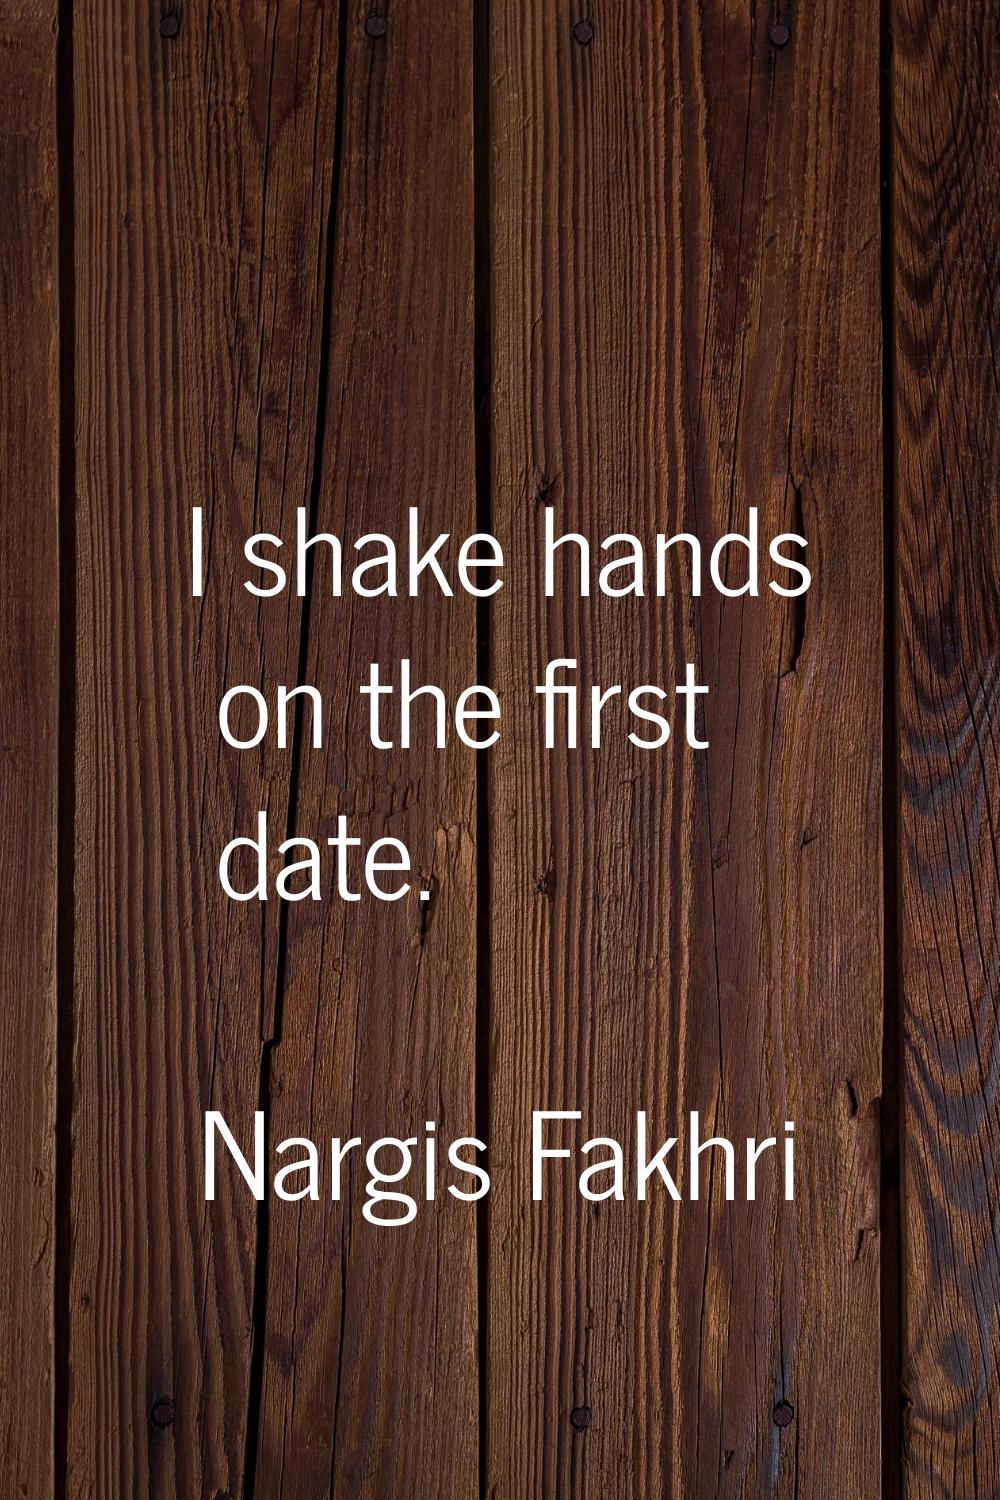 I shake hands on the first date.